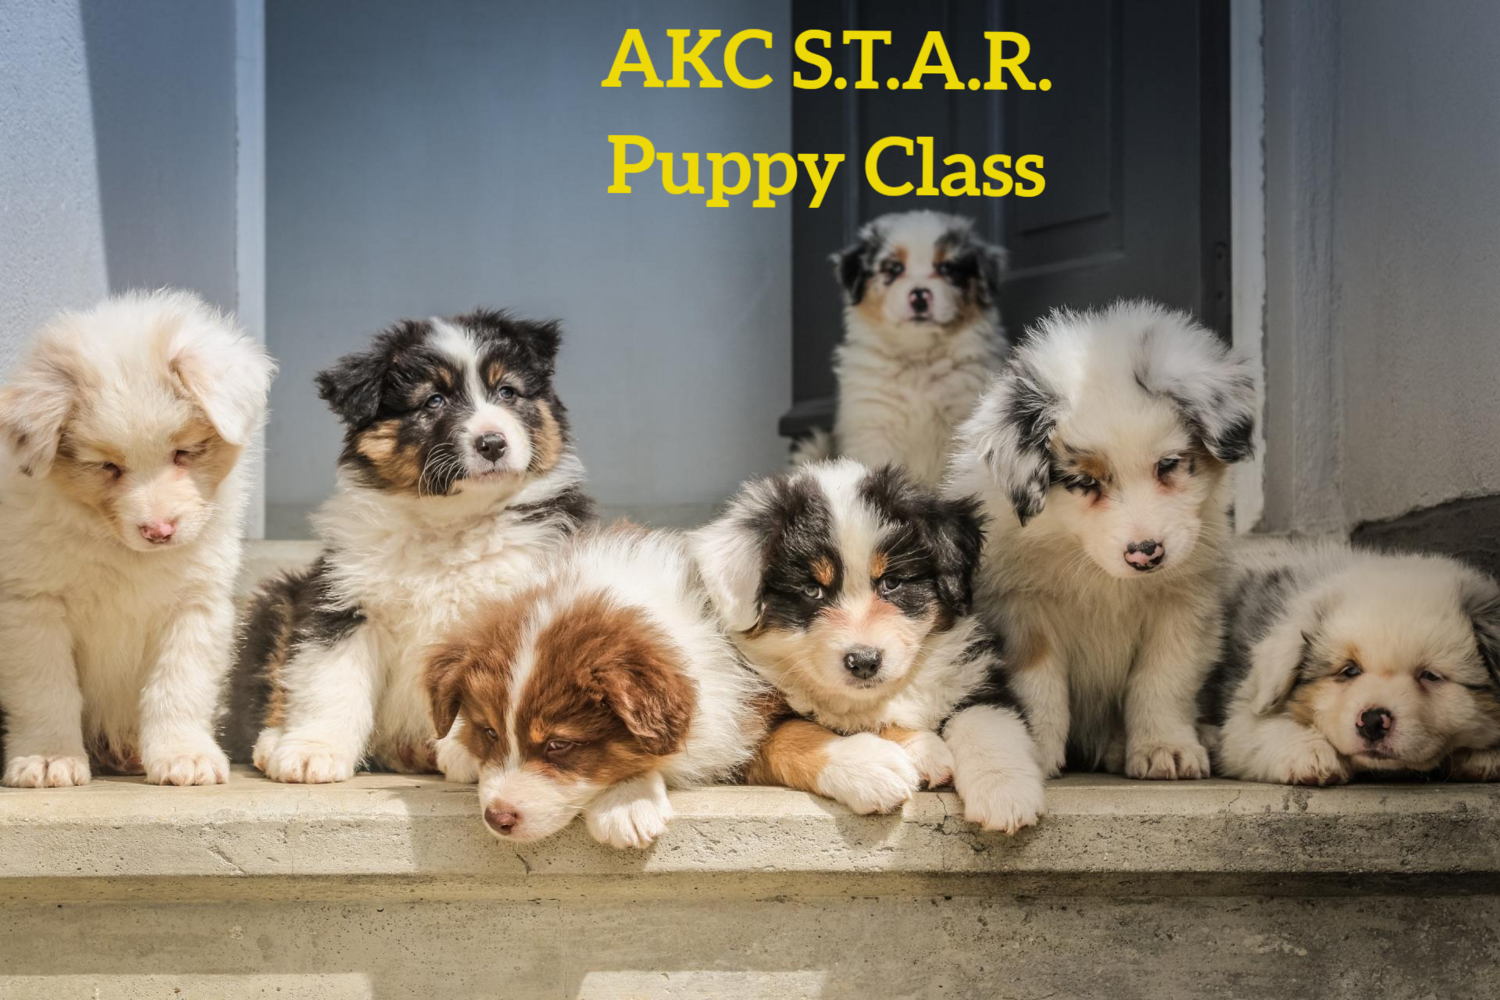 AKC S.T.A.R. Puppy Class. Wednesdays 6:30pm (Starts June 5) Trainer: Nil O'Boyle